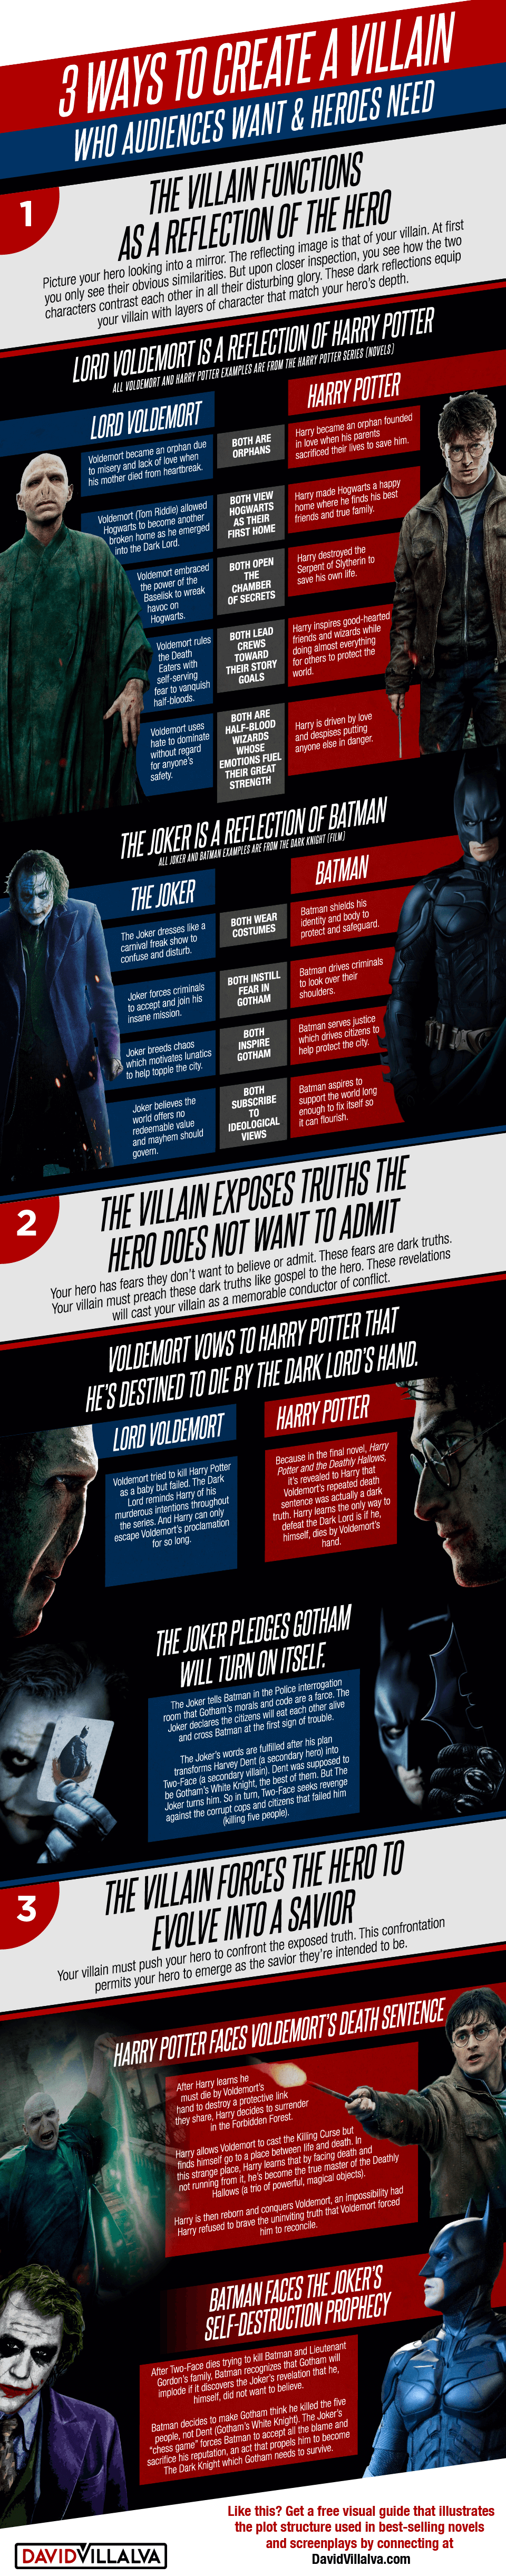 3 Ways to Create a Villain Who Audiences Want & Heroes Need [Infographic]